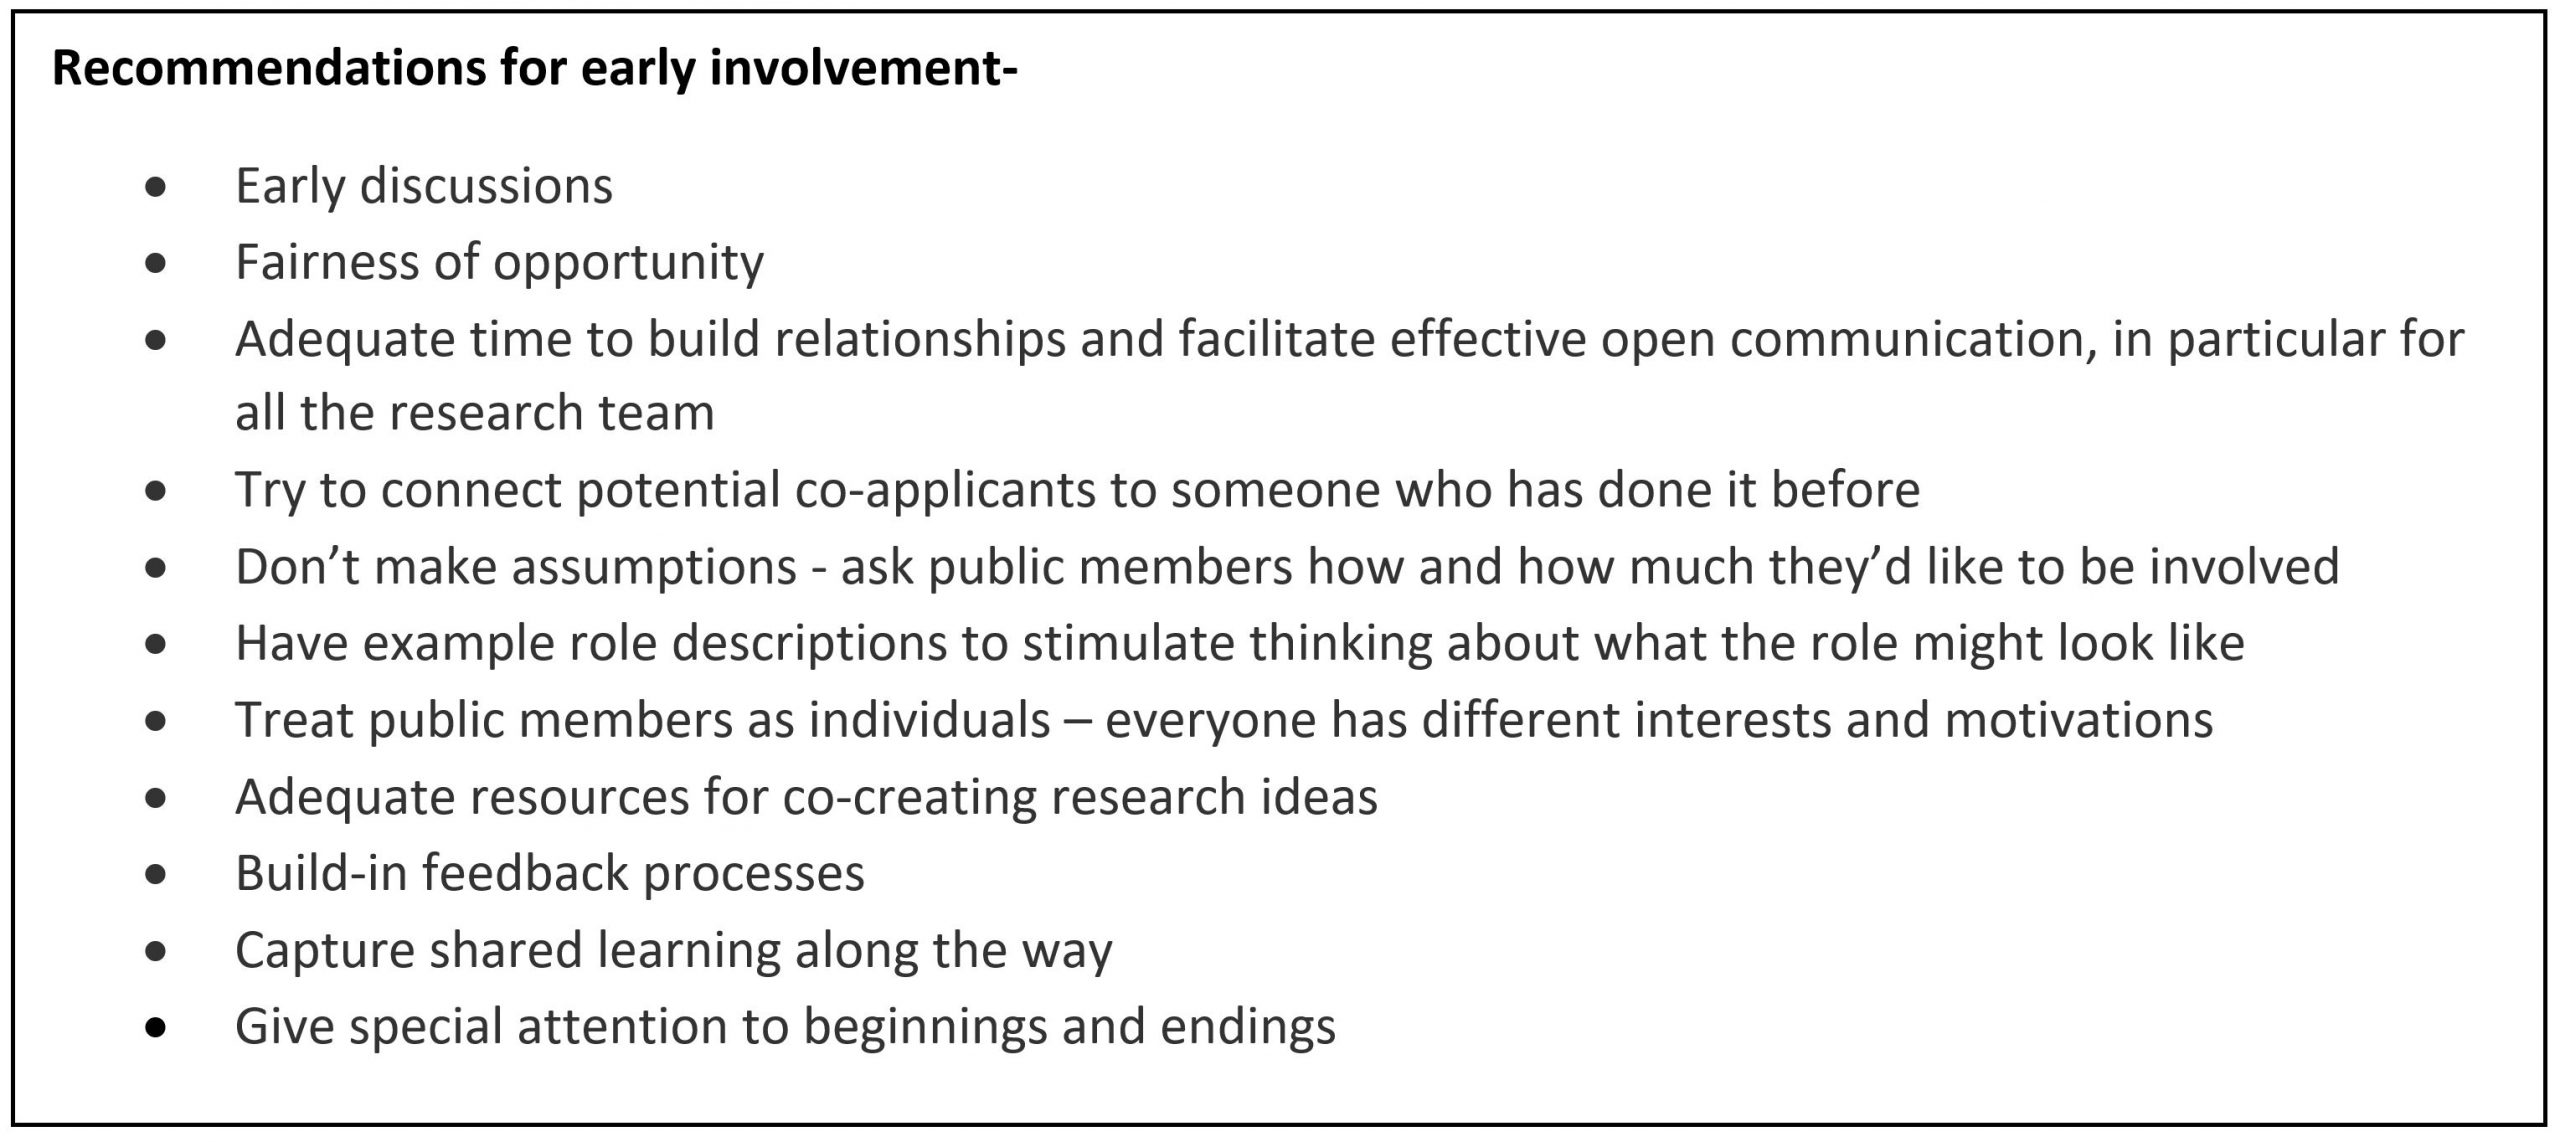 A graphic illustrating a list of recommendations for early involvement: • Early discussions • Fairness of opportunity • Adequate time to build relationships and facilitate effective open communication, in particular for all the research team • Try to connect potential co-applicants to someone who has done it before • Don’t make assumptions - ask public members how and how much they’d like to be involved • Have example role descriptions to stimulate thinking about what the role might look like • Treat public members as individuals – everyone has different interests and motivations • Adequate resources for co-creating research ideas • Build-in feedback processes • Capture shared learning along the way • Give special attention to beginnings and endings